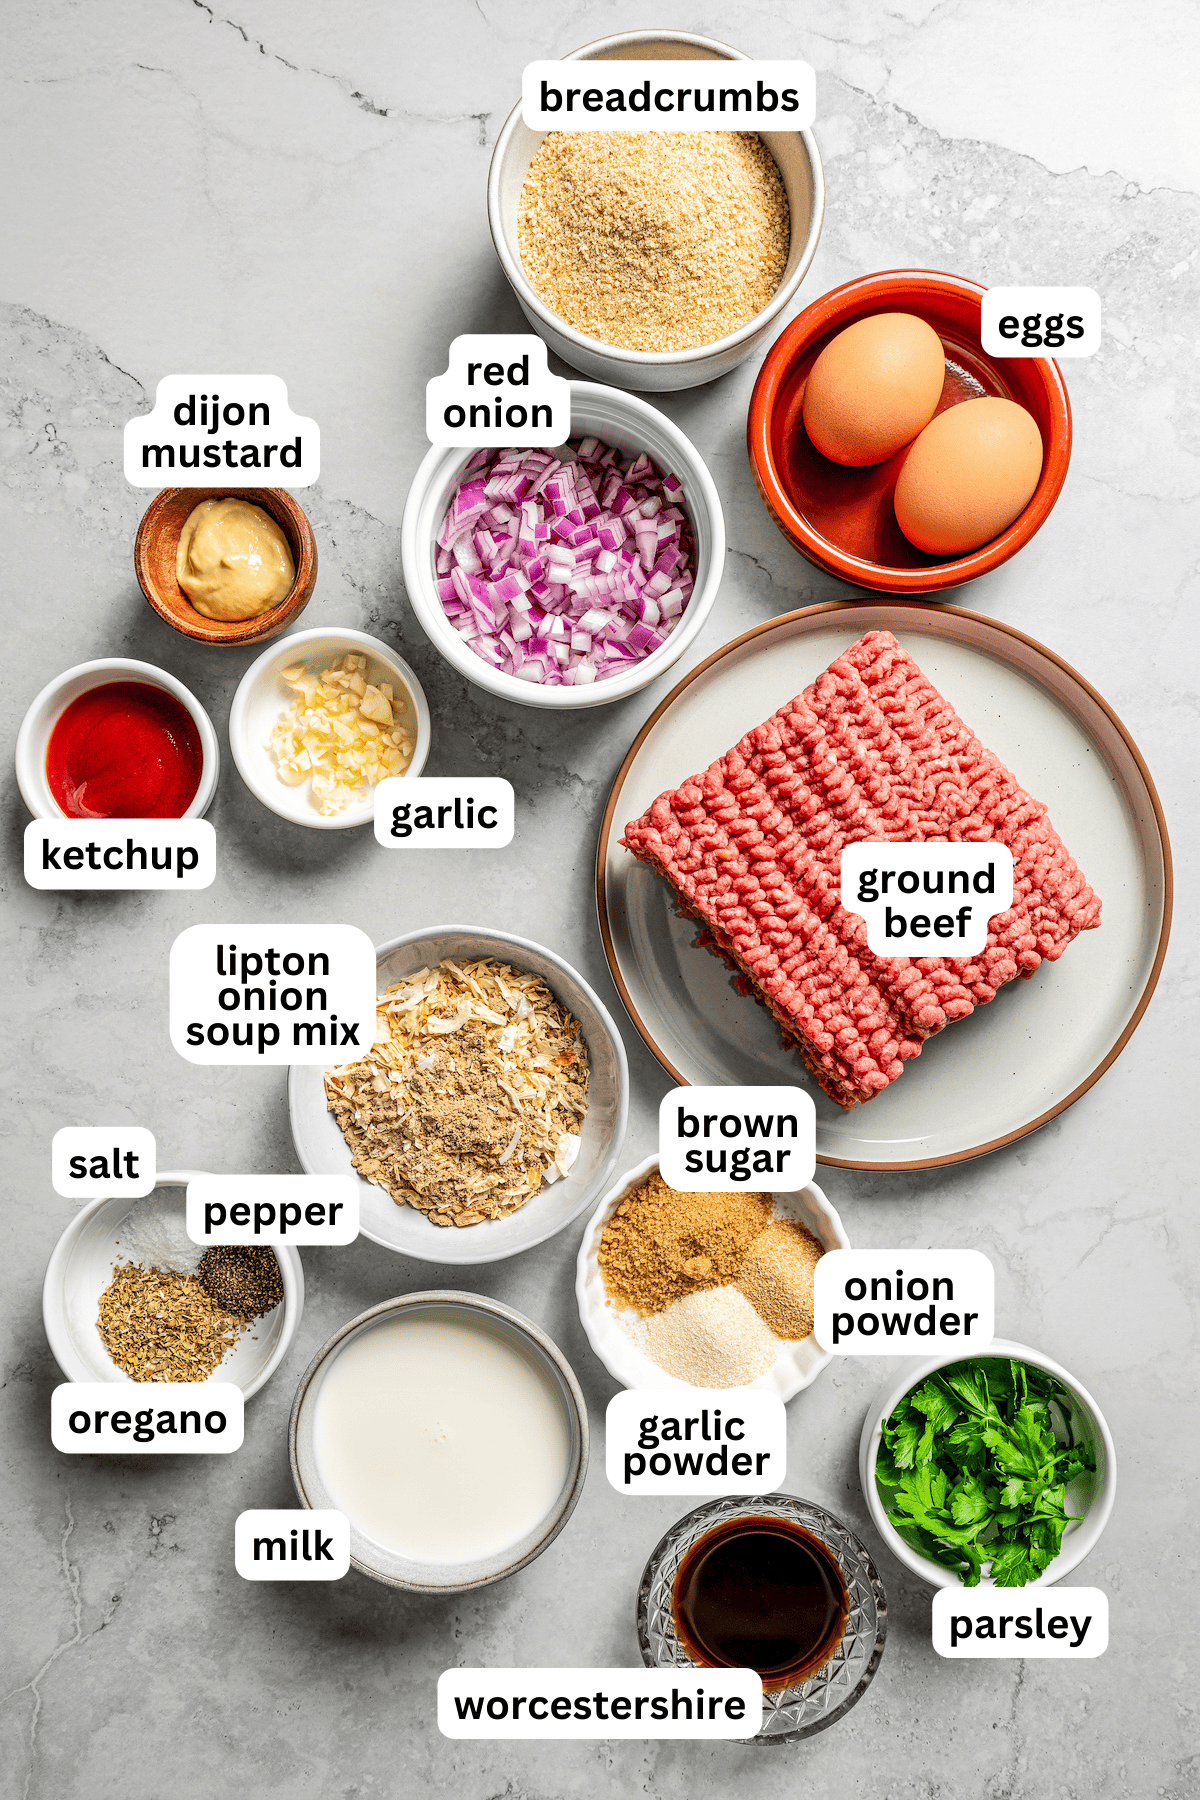 Image of all the ingredients needed to make a Lipton Onion Soup Meatloaf Recipe.